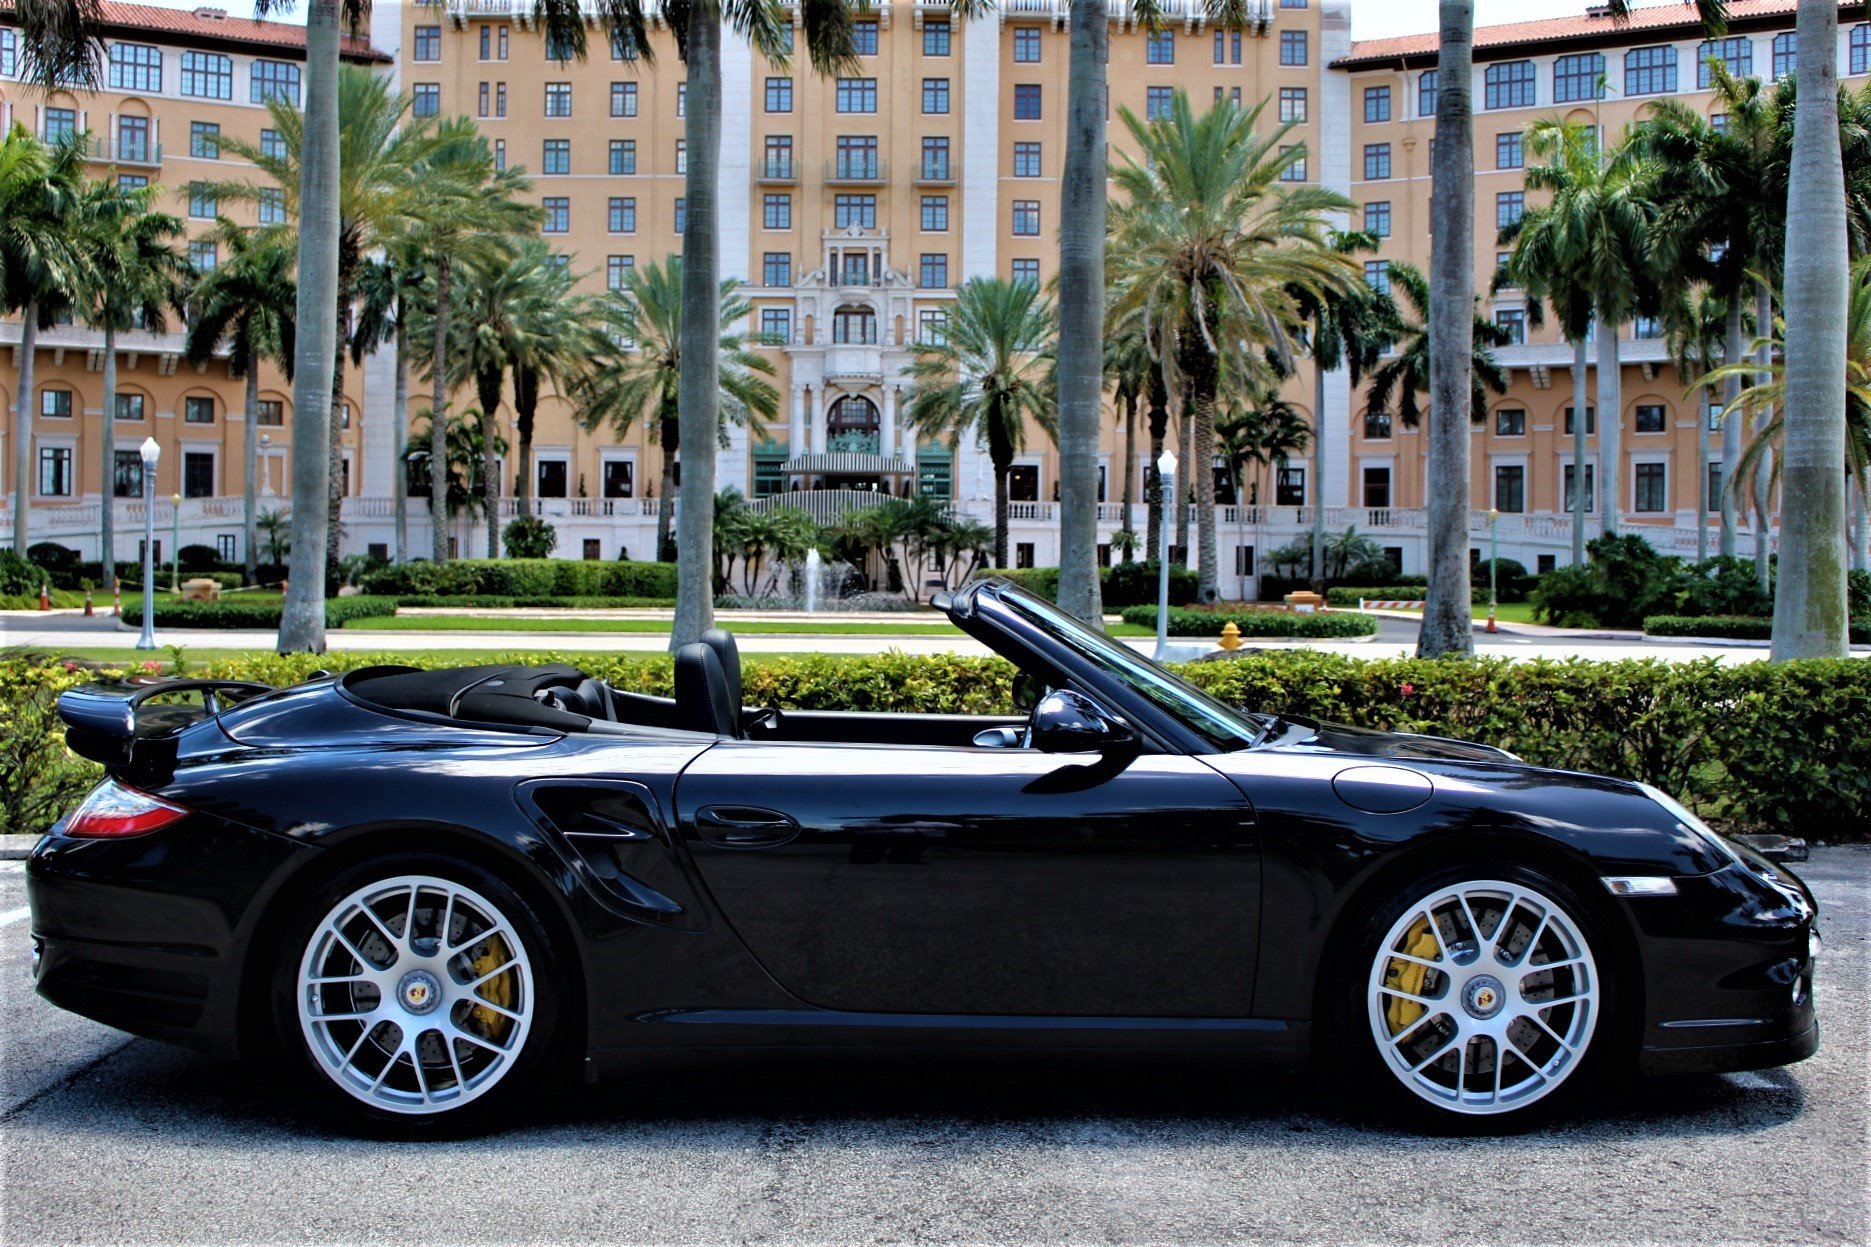 Used 2011 Porsche 911 Turbo S for sale Sold at The Gables Sports Cars in Miami FL 33146 1